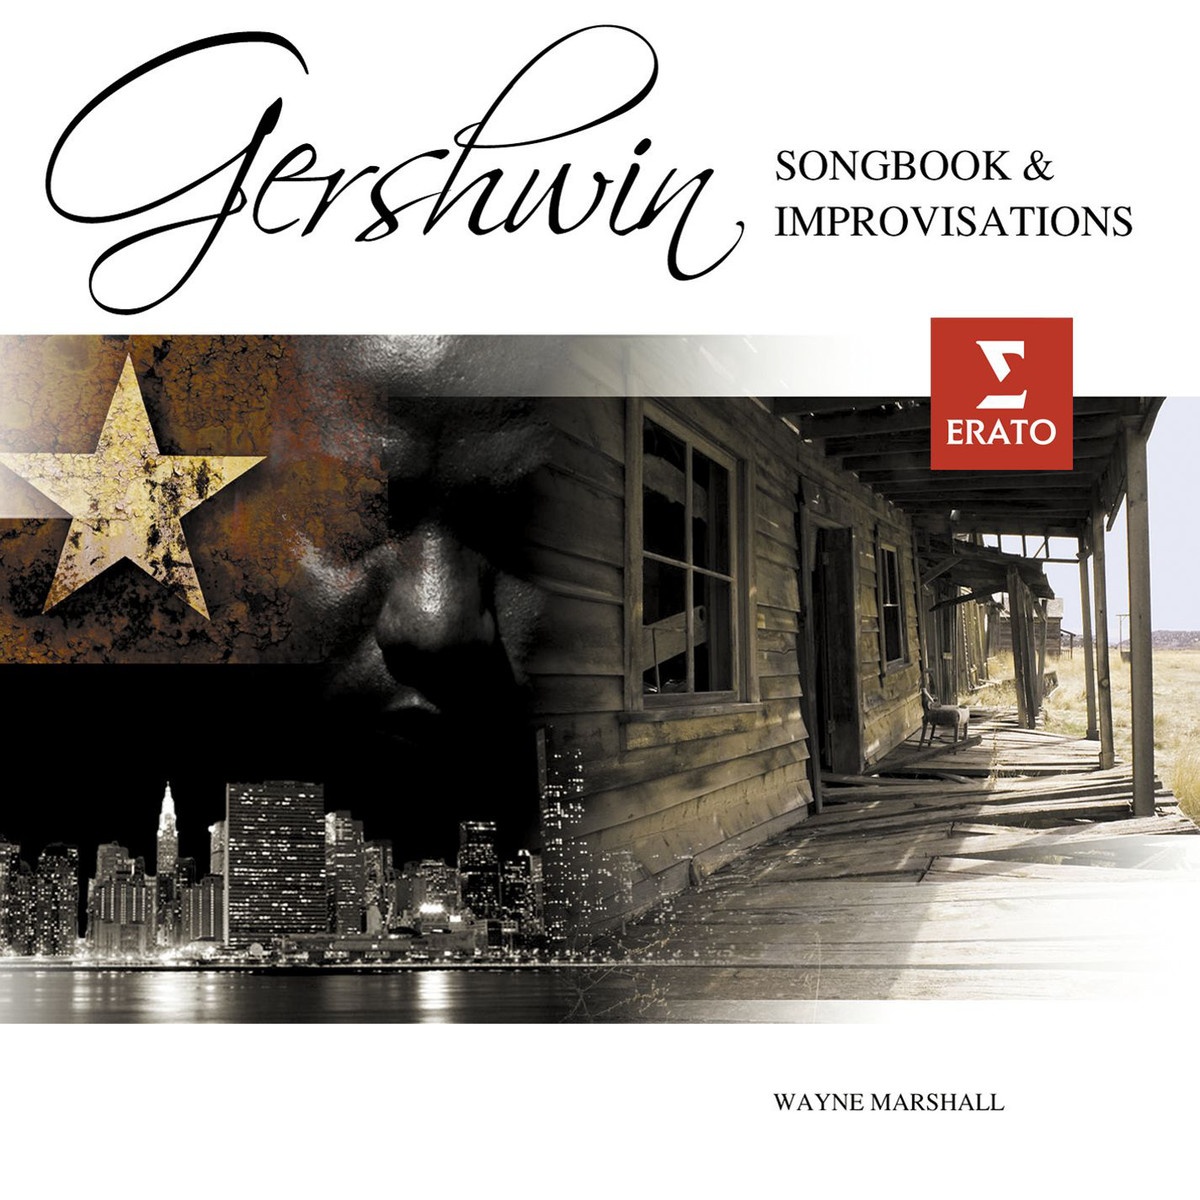 A Gershwin Songbook: improvisations on songs by George Gershwin: Lady, be good (Lady, be Good)